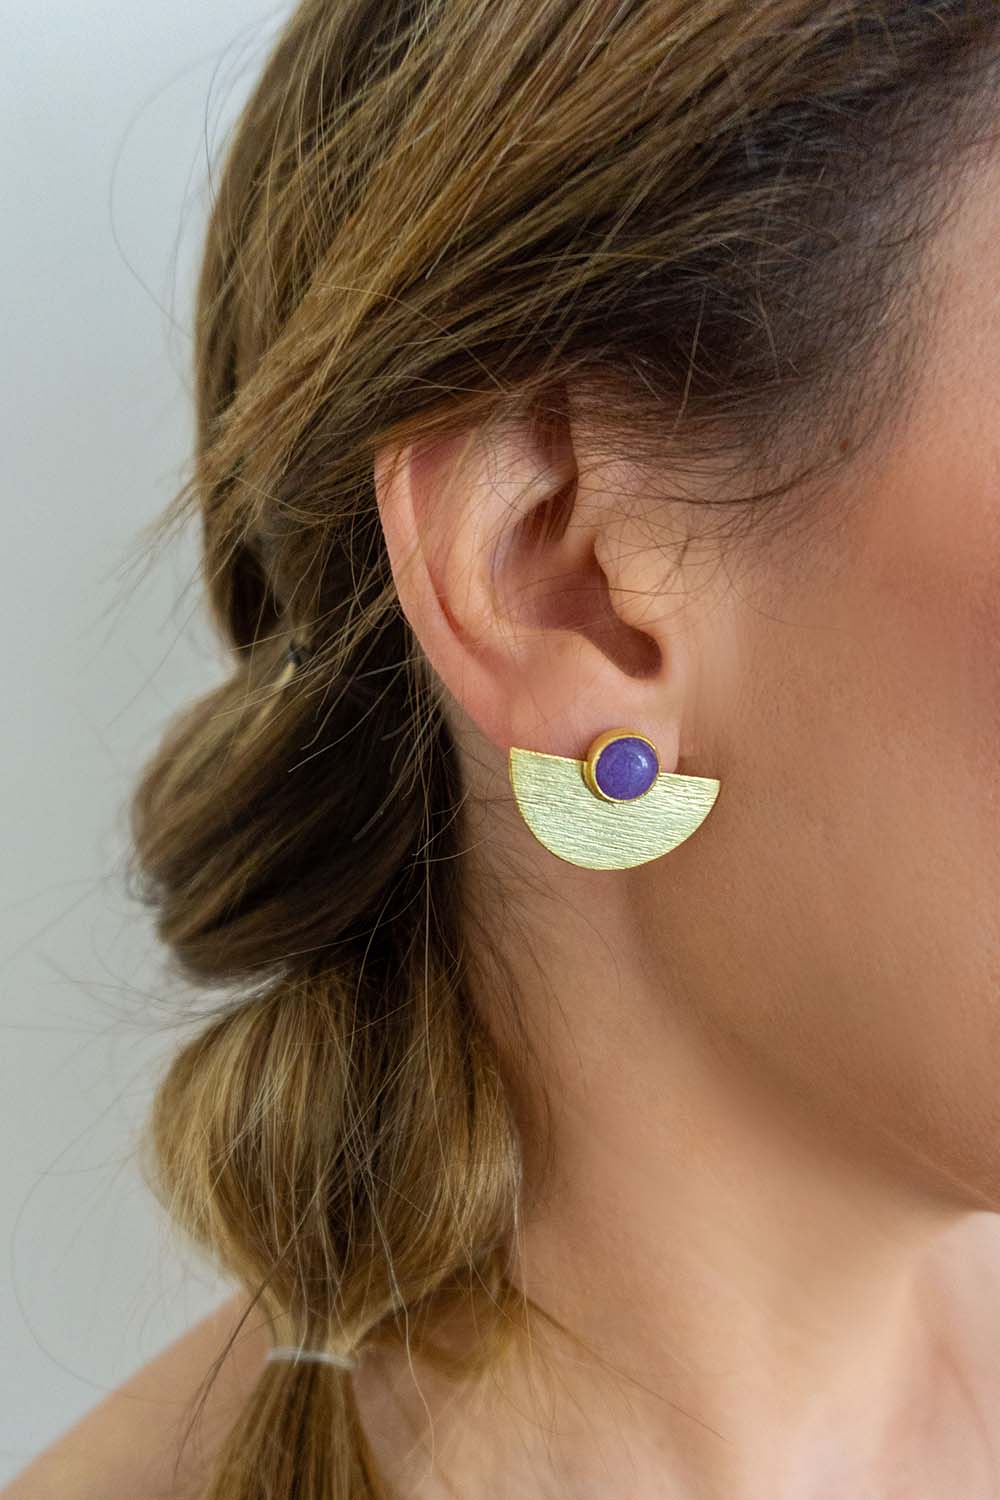 Earrings with Natural Stones Mburuvi Violet Quartz in Sterling Silver with 18 kt Gold Plated. 6 colors